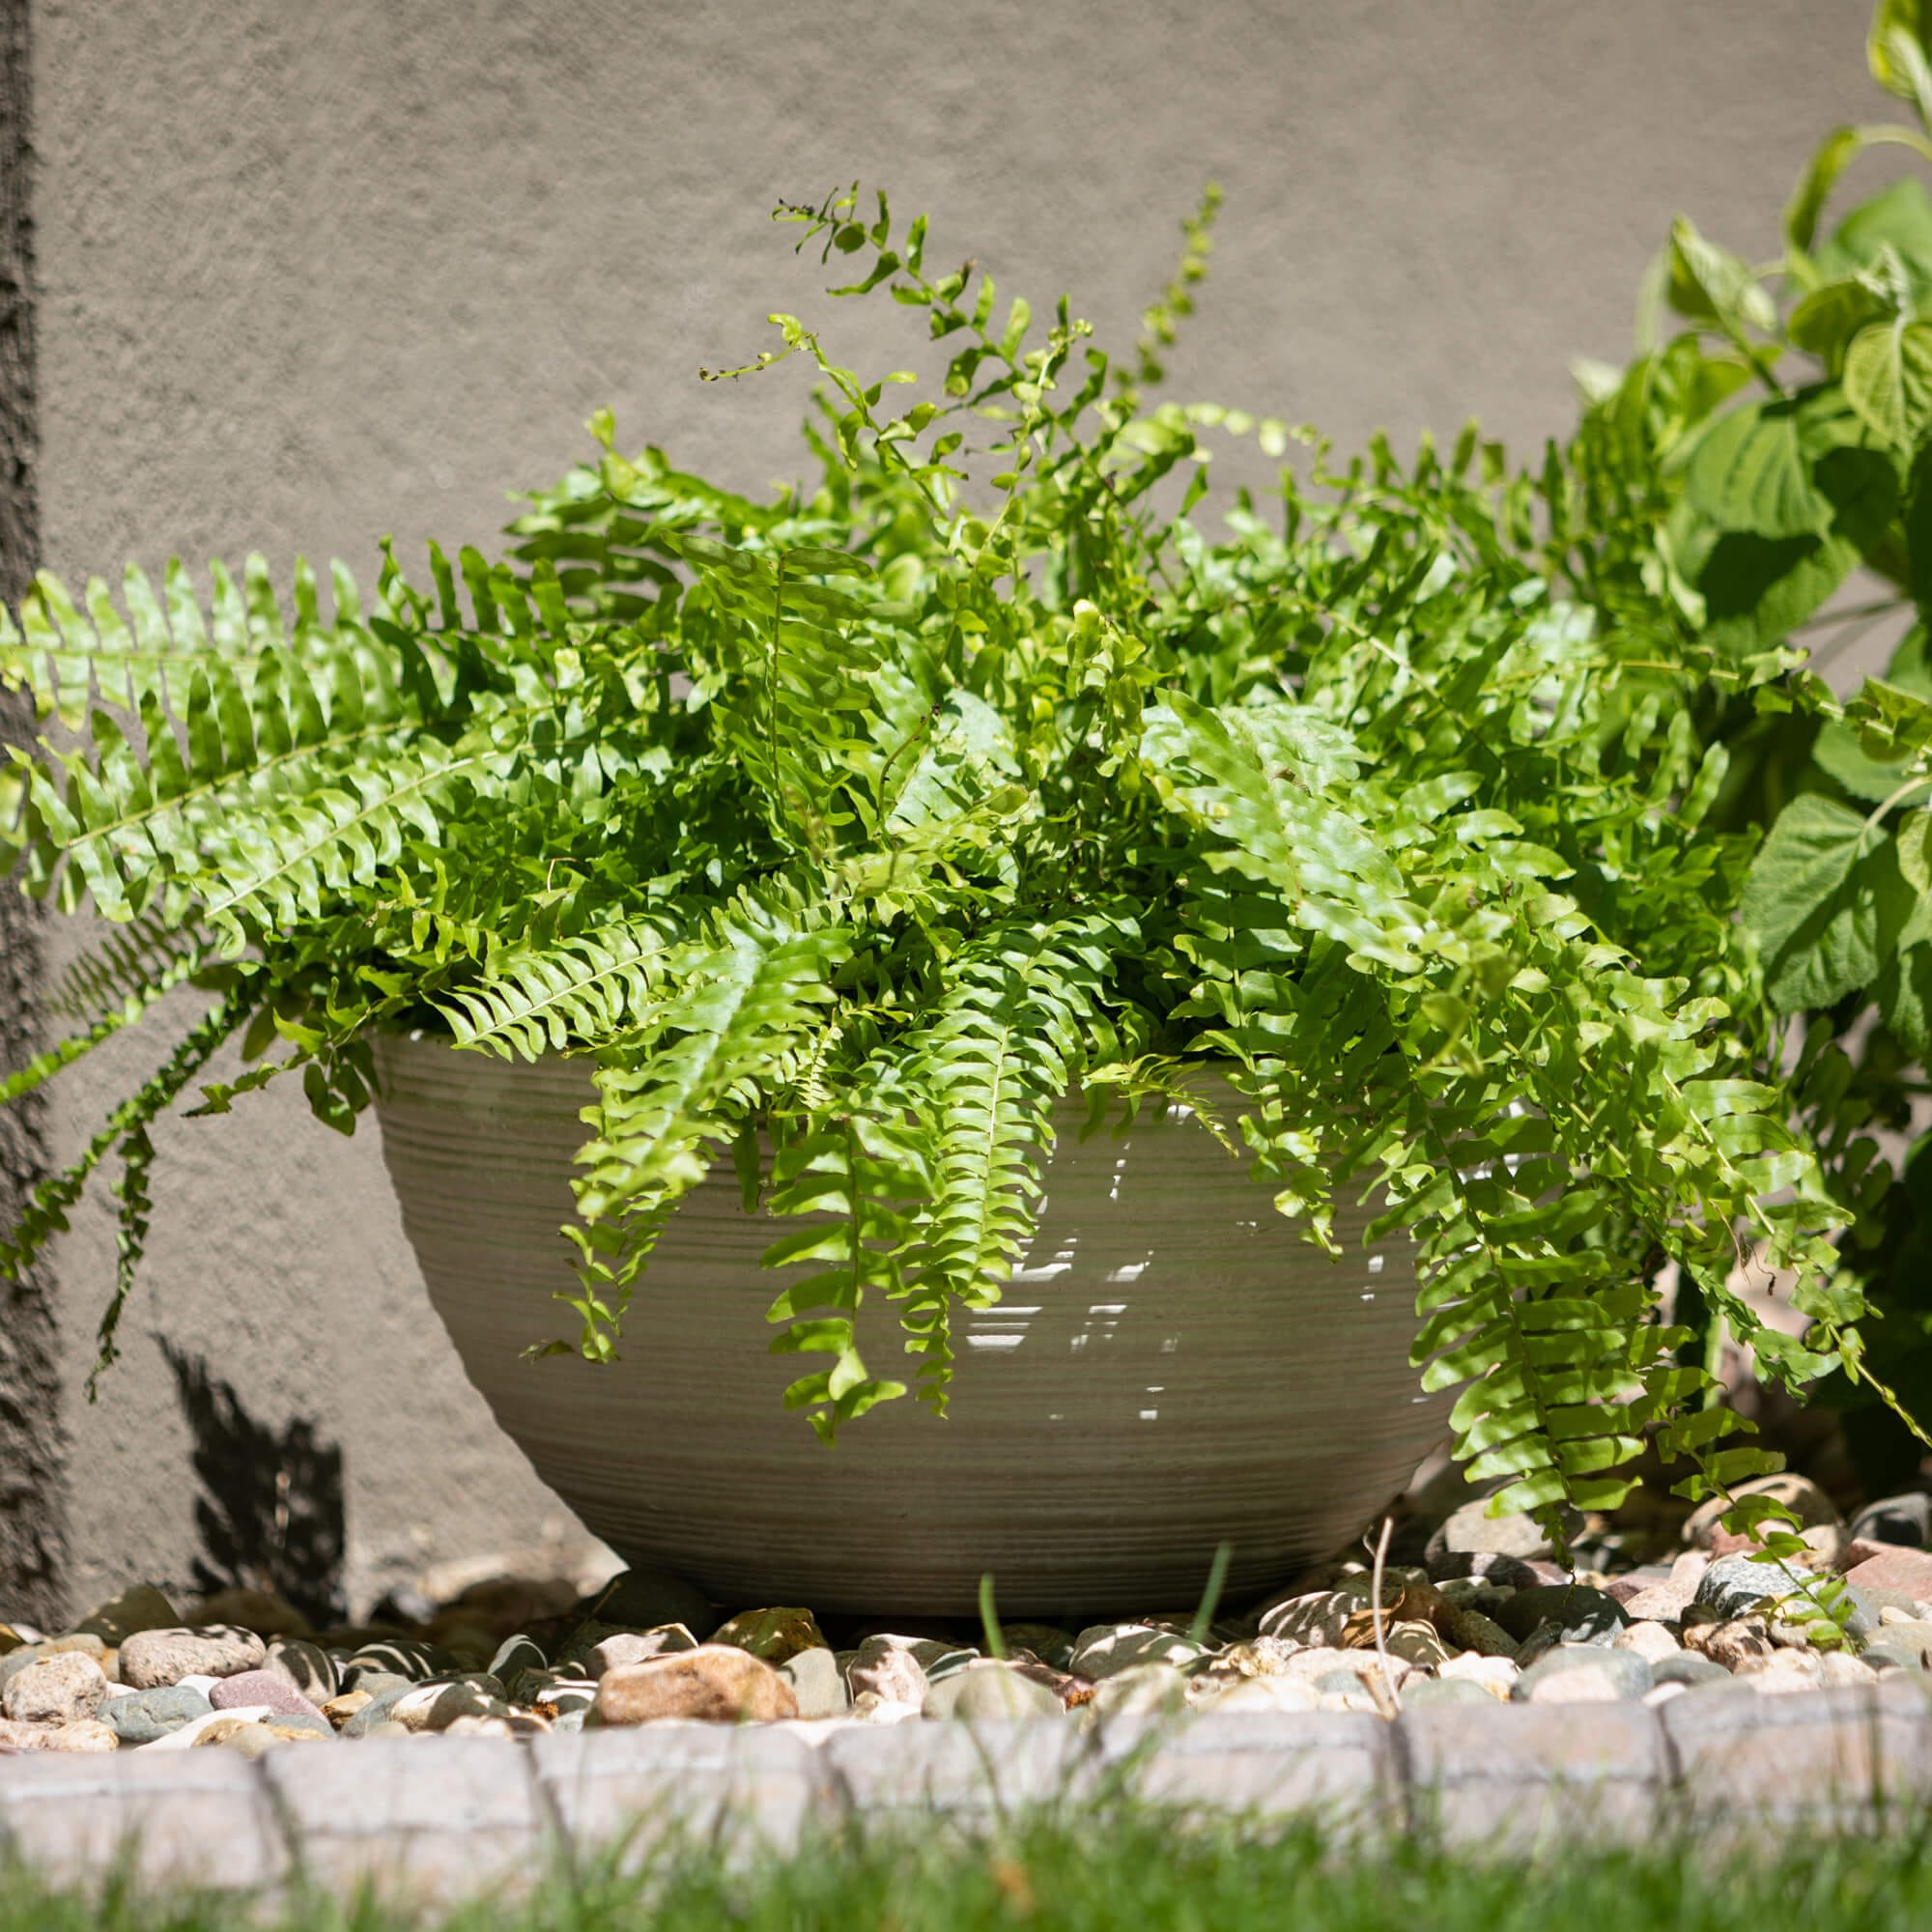 Ribbed Charcoal Bowl Cement Planters Elevate Home Decor - Outdoors